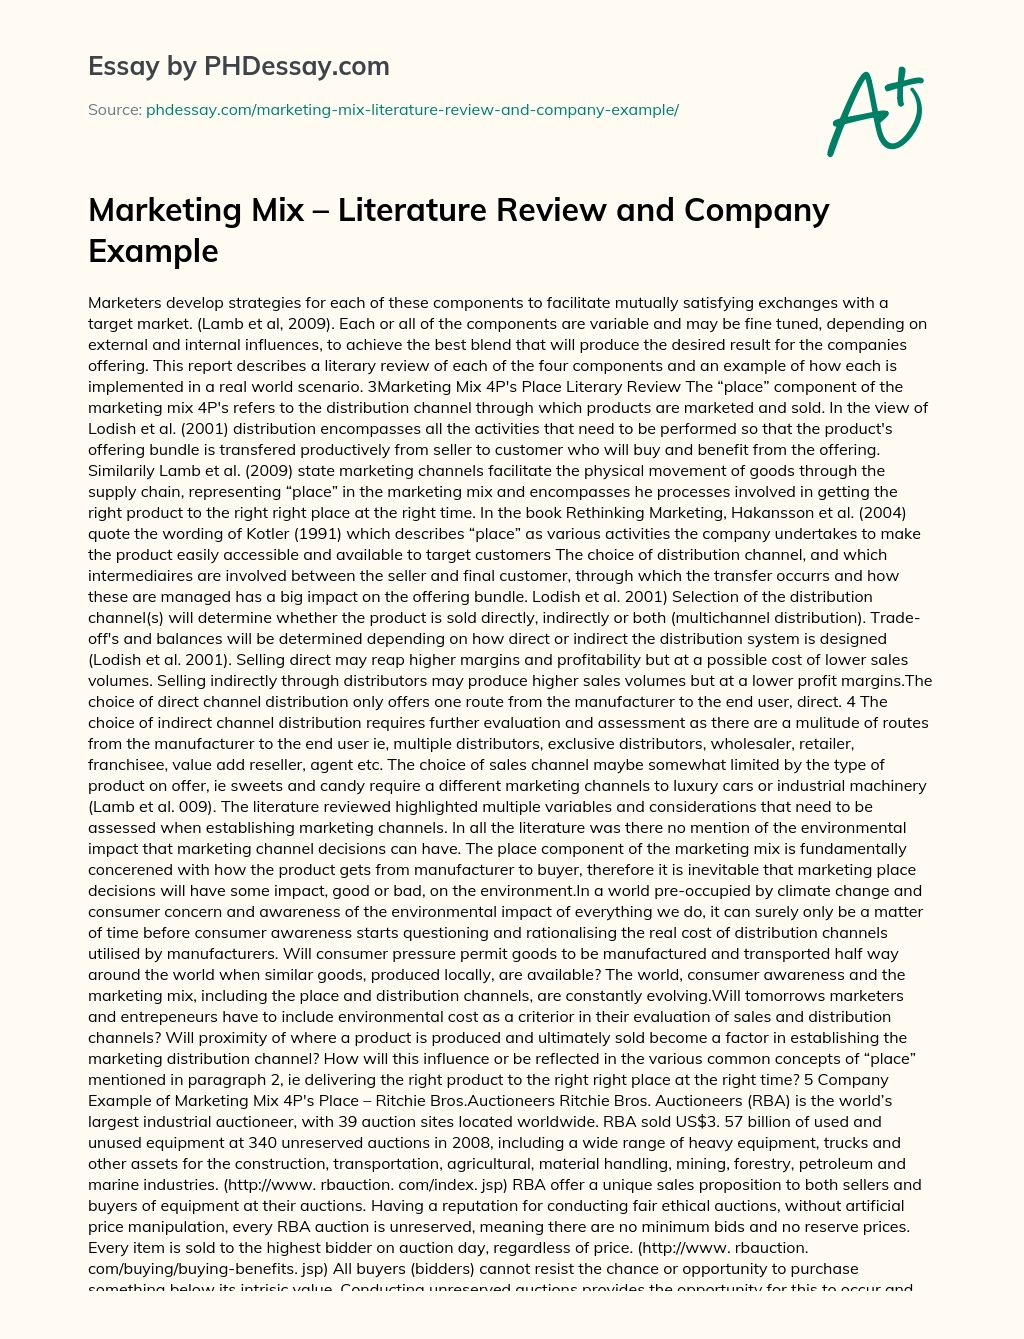 Marketing Mix – Literature Review and Company Example essay